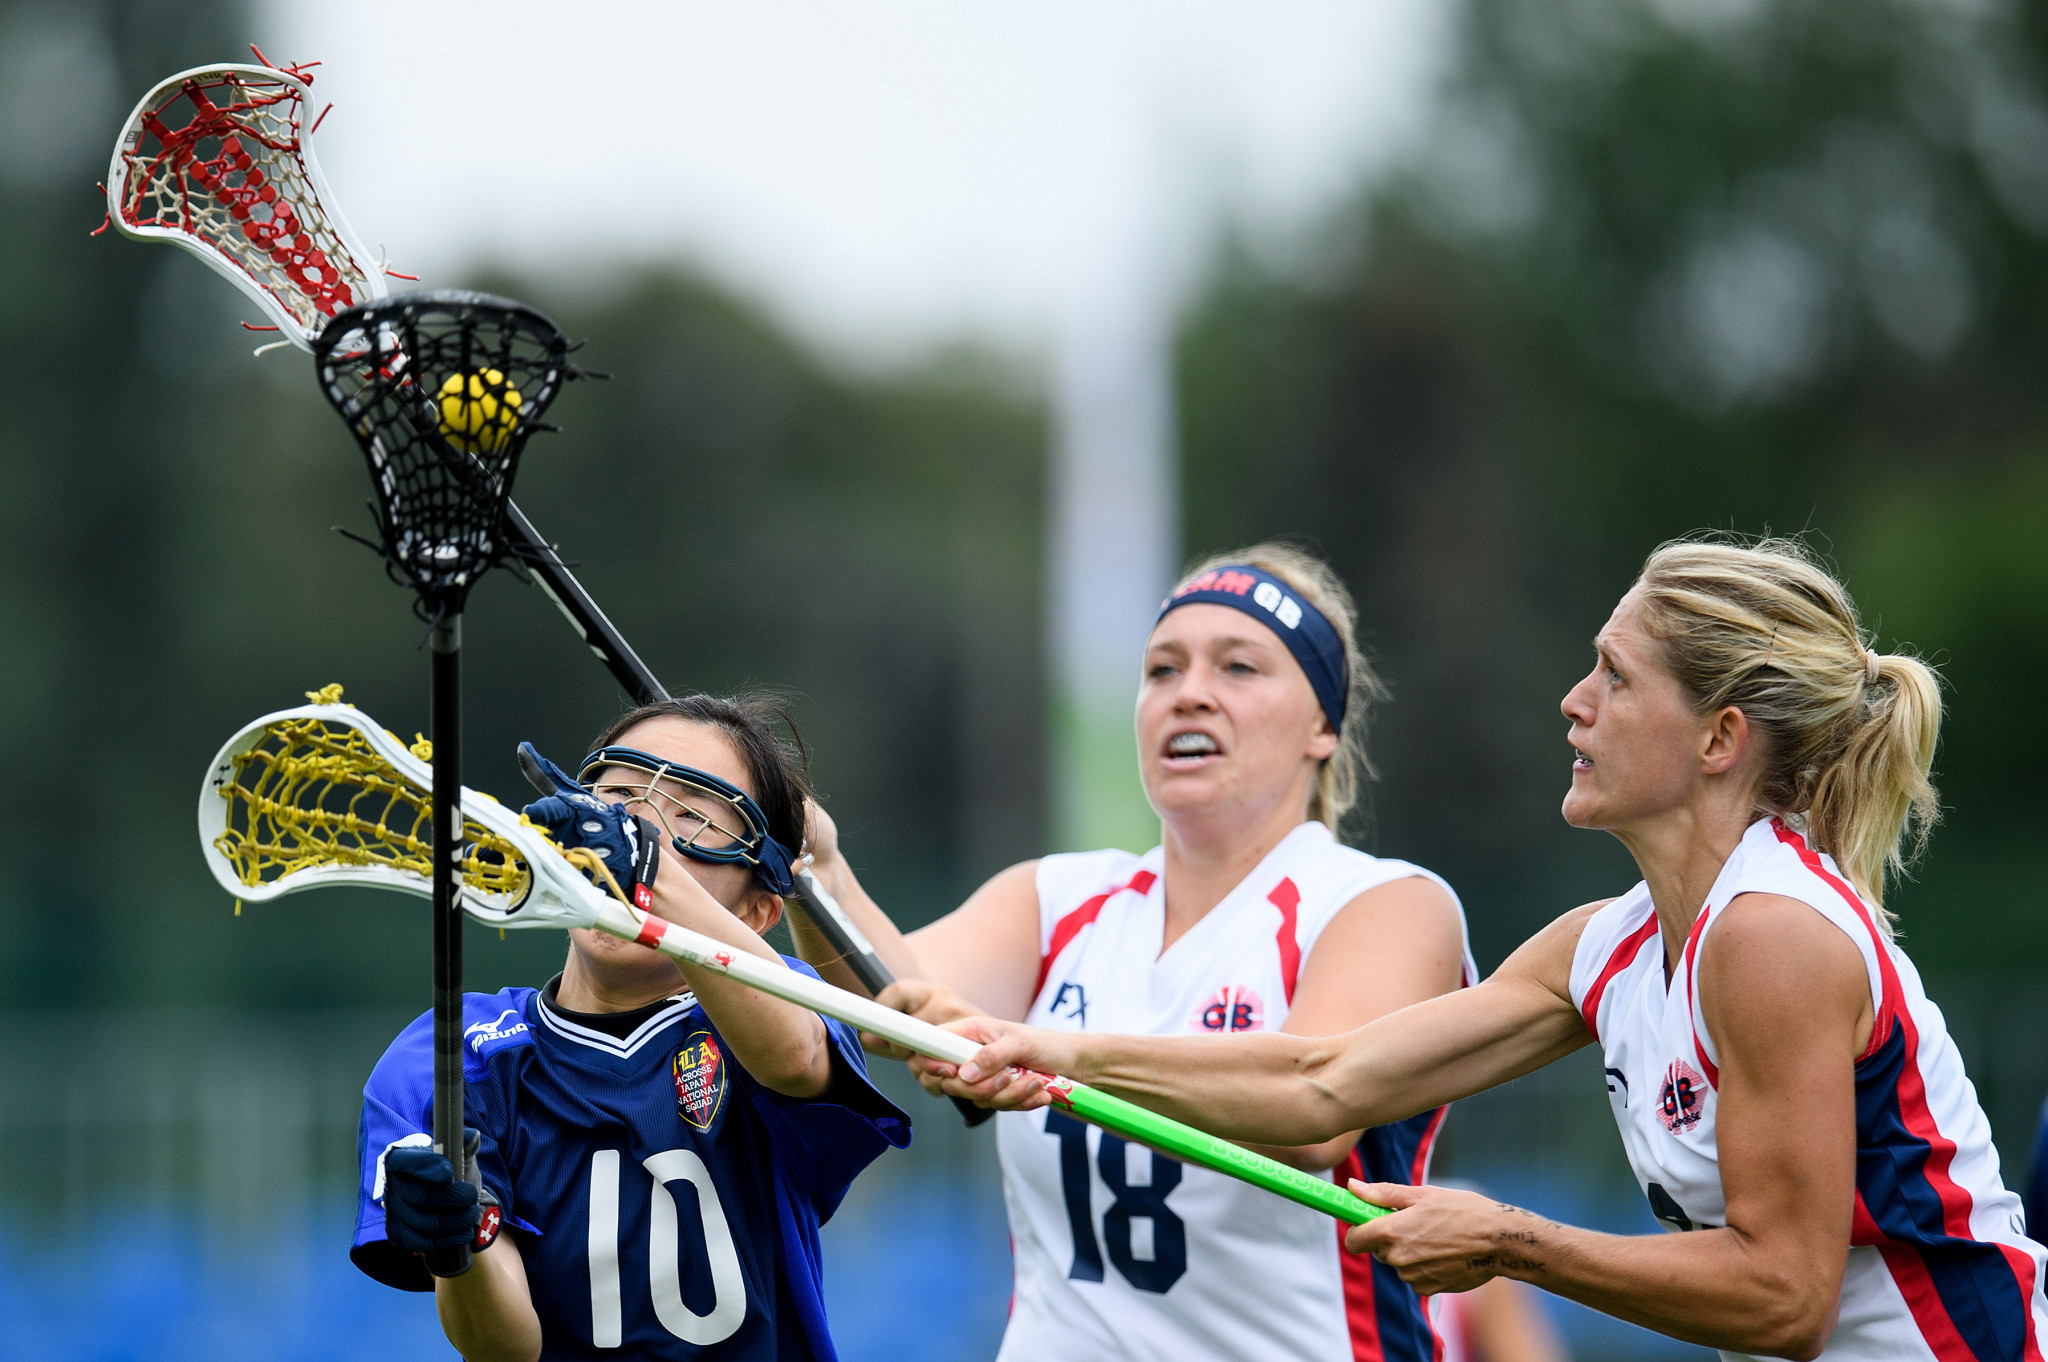 The ultimate aim of lacrosse is Olympic inclusion  ©Getty Images